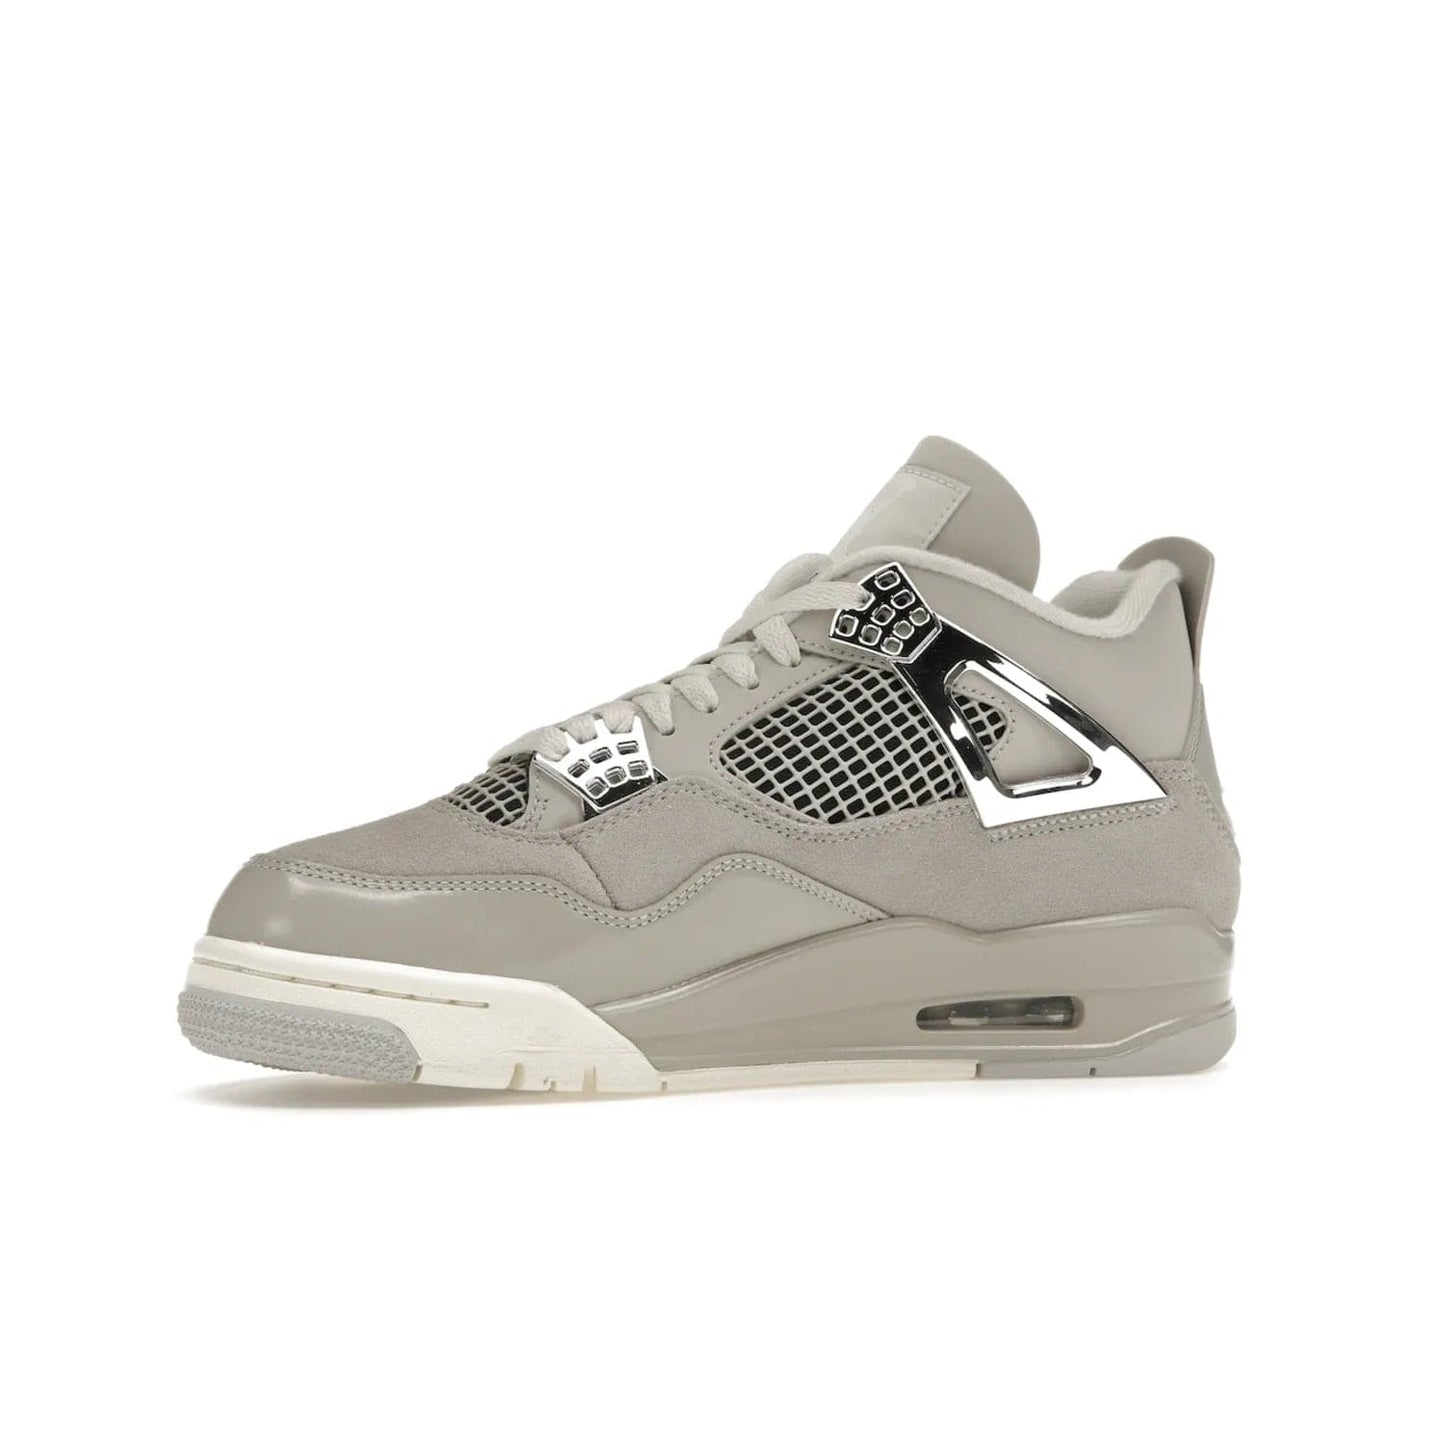 Jordan 4 Retro Frozen Moments (Women's) - Image 17 - Only at www.BallersClubKickz.com - The Jordan 4 Retro Frozen Moments is a stylish blend of classic design elements and modern tones. Featuring suede and leather overlays in a light iron-ore, sail, neutral grey, black, and metallic silver colorway. Get this iconic high-performance sneaker for $210.